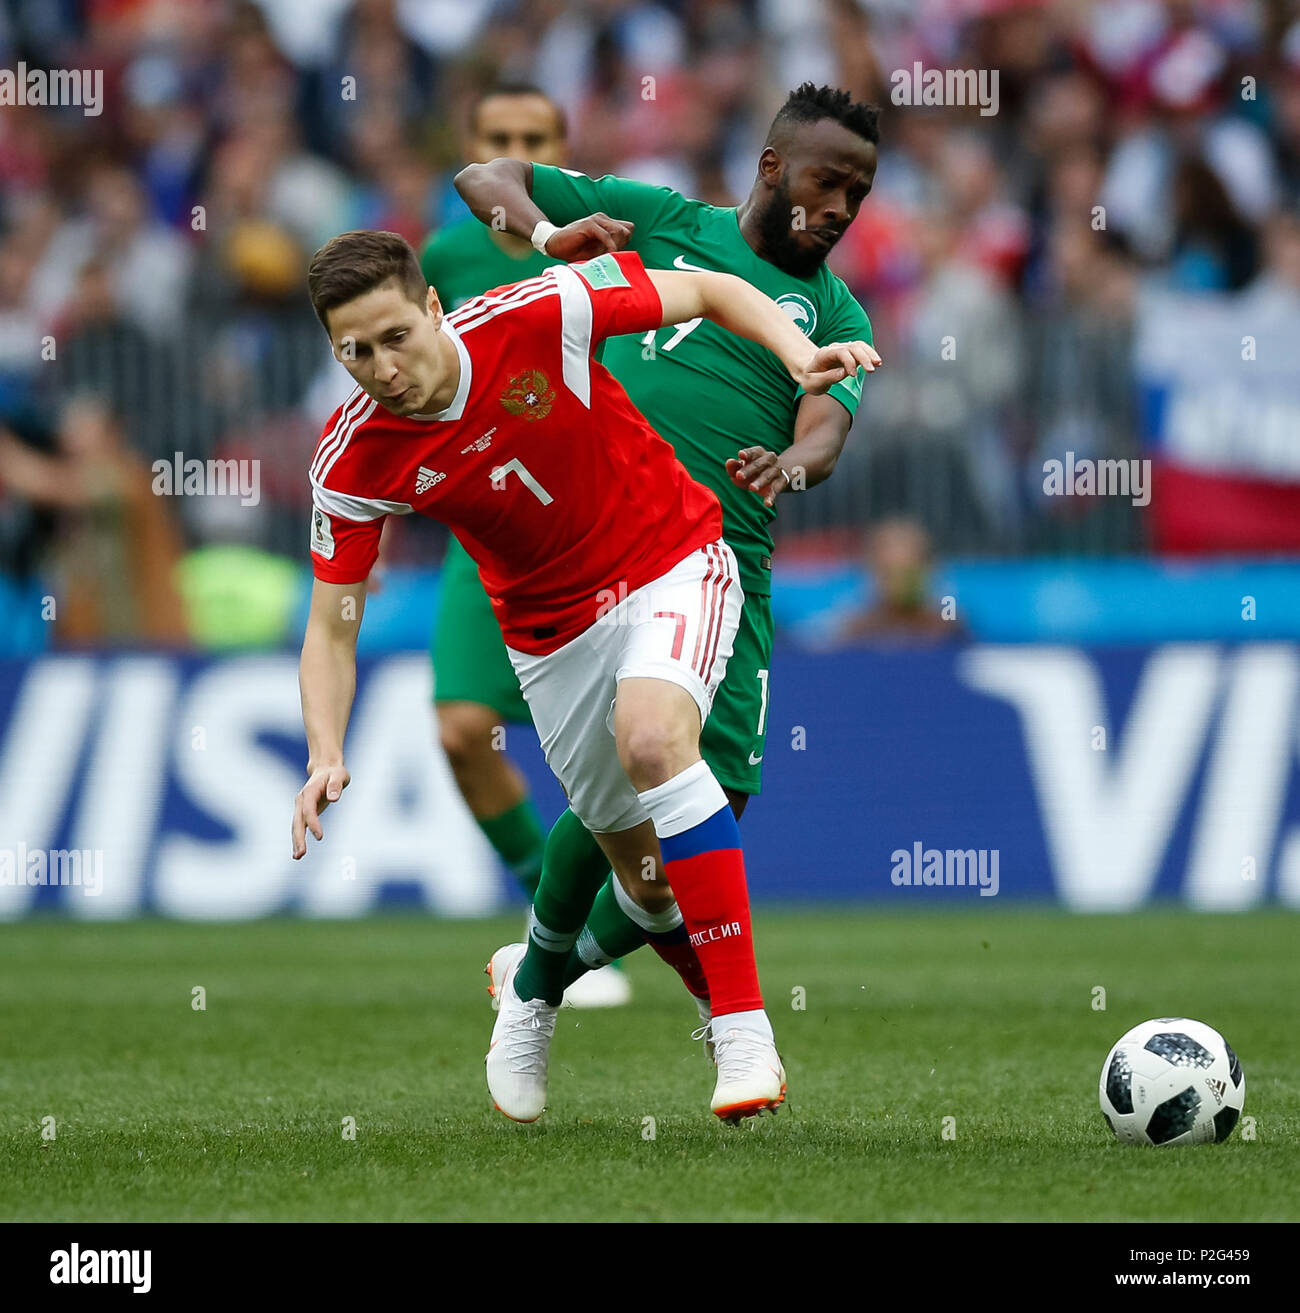 Moscow, Russia. 14th June 2018. Daler Kuzyayev of Russia and Fahad Al-Muwallad of Saudi Arabia during the 2018 FIFA World Cup Group A match between Russia and Saudi Arabia at Luzhniki Stadium on June 14th 2018 in Moscow, Russia. Credit: PHC Images/Alamy Live News Stock Photo